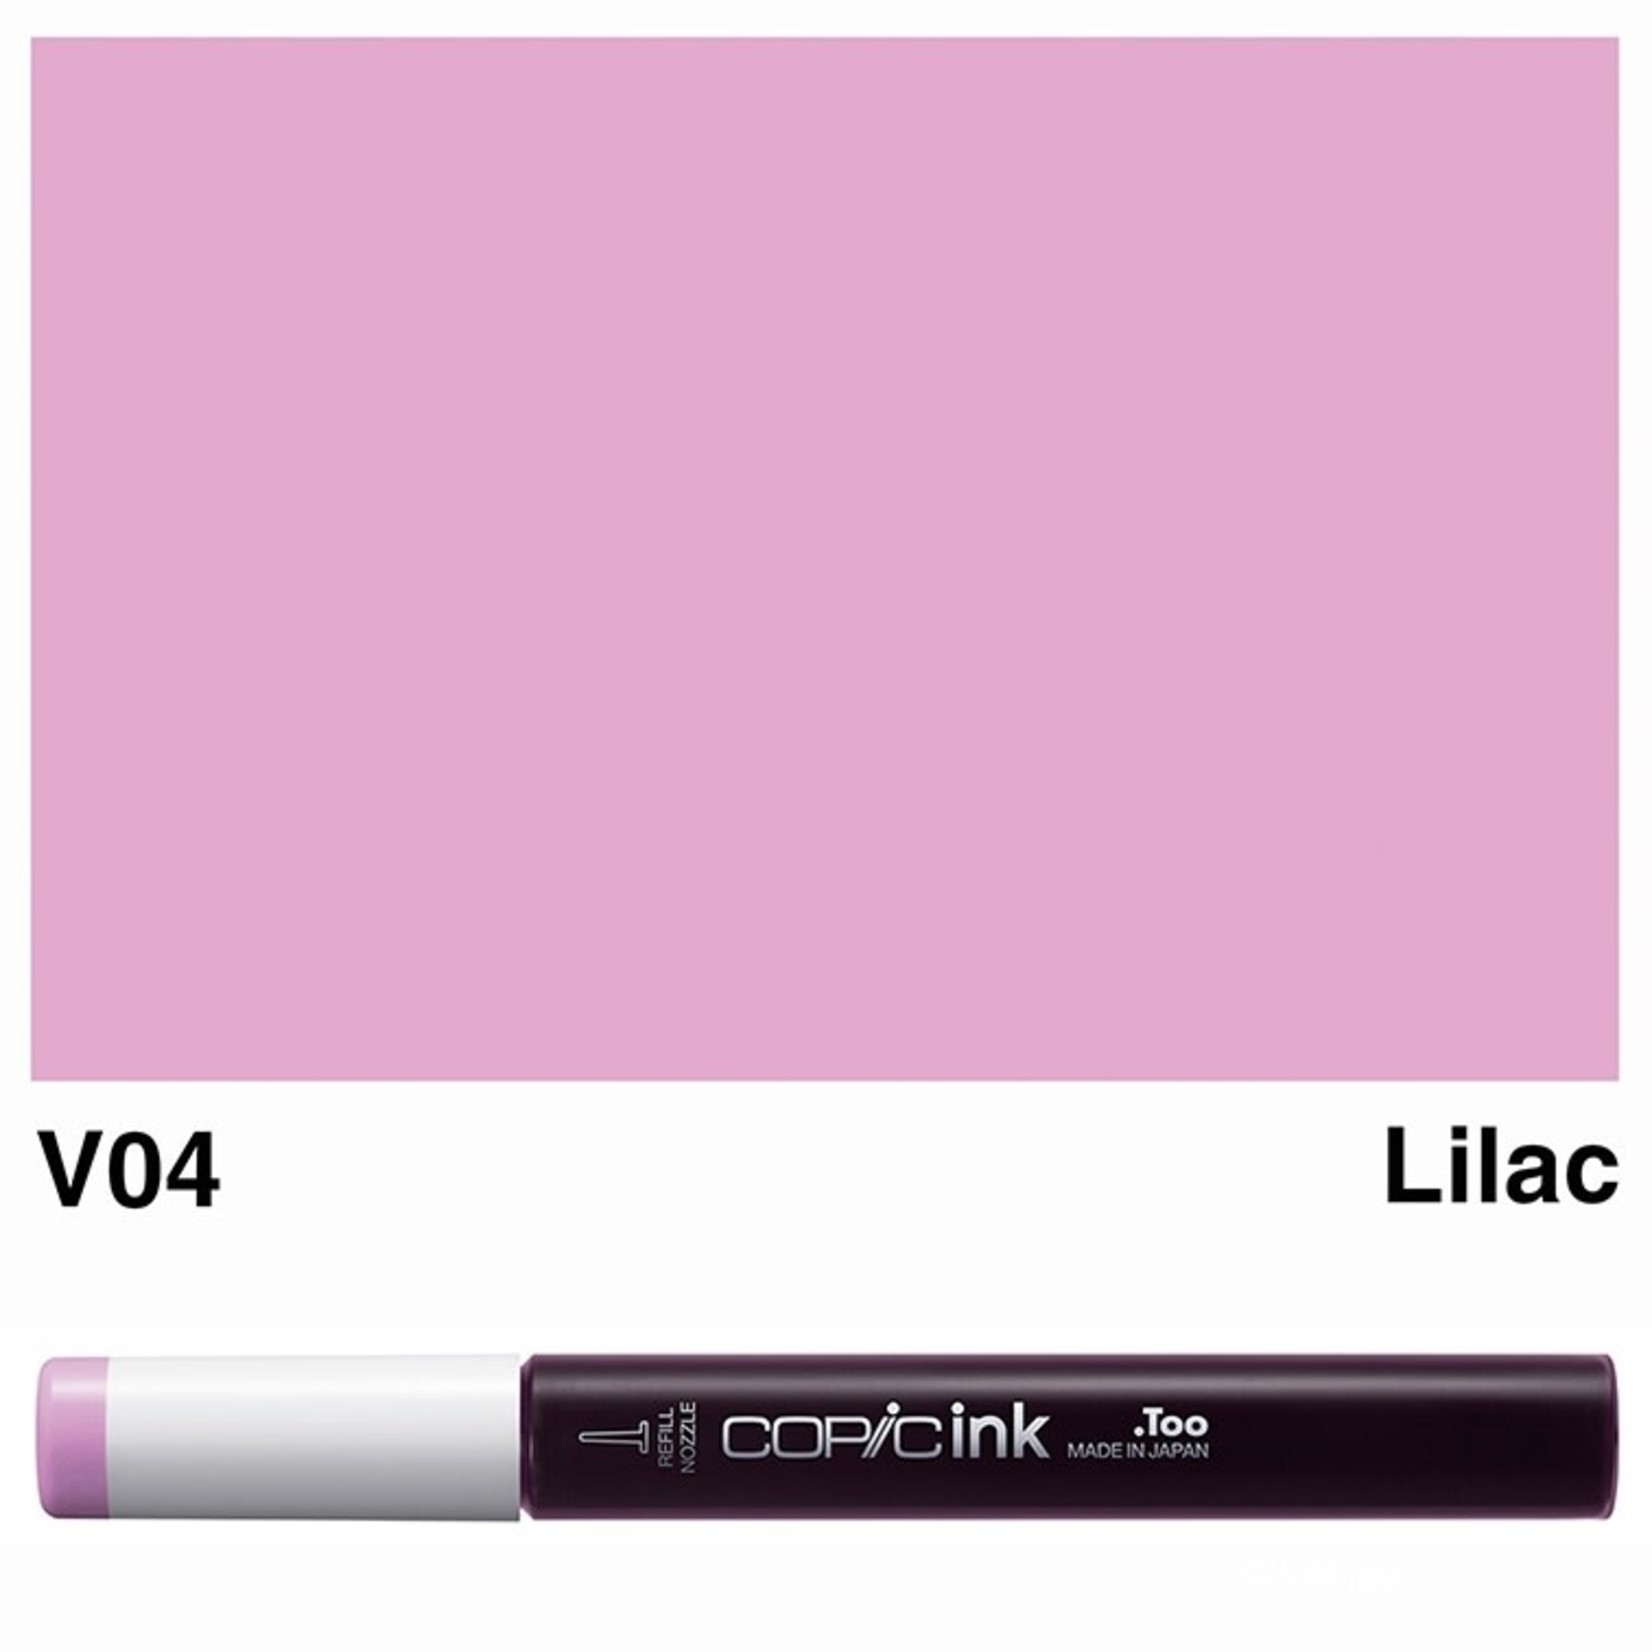 Copic Copic Various Ink V04 Lilac